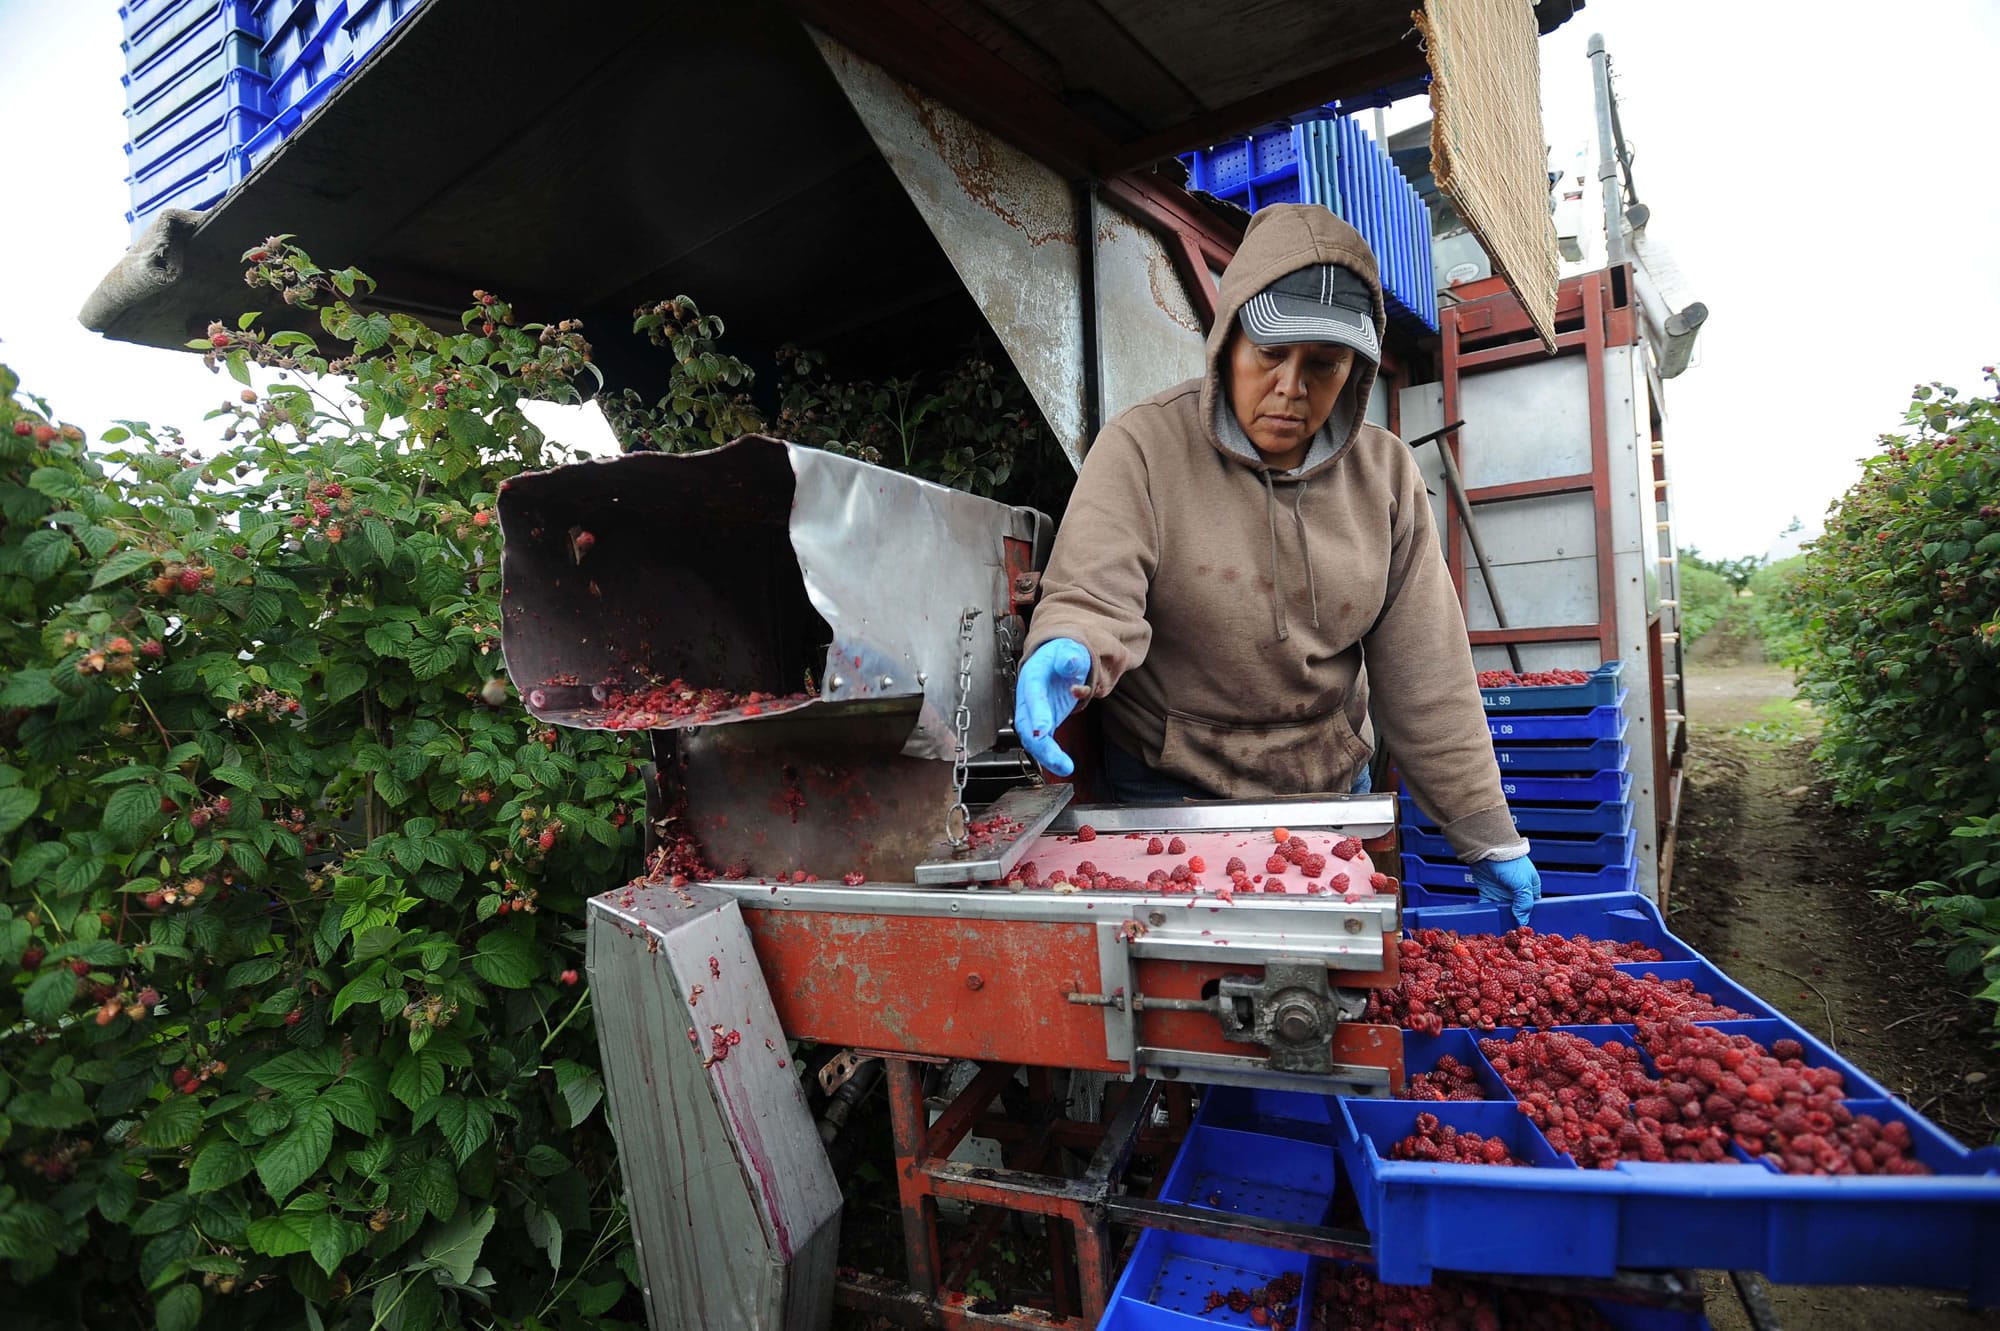 Maria DeGollao sorts raspberries on a berry harvester during the first picking of raspberries on the Ehlers farm Thursday north of Lynden .